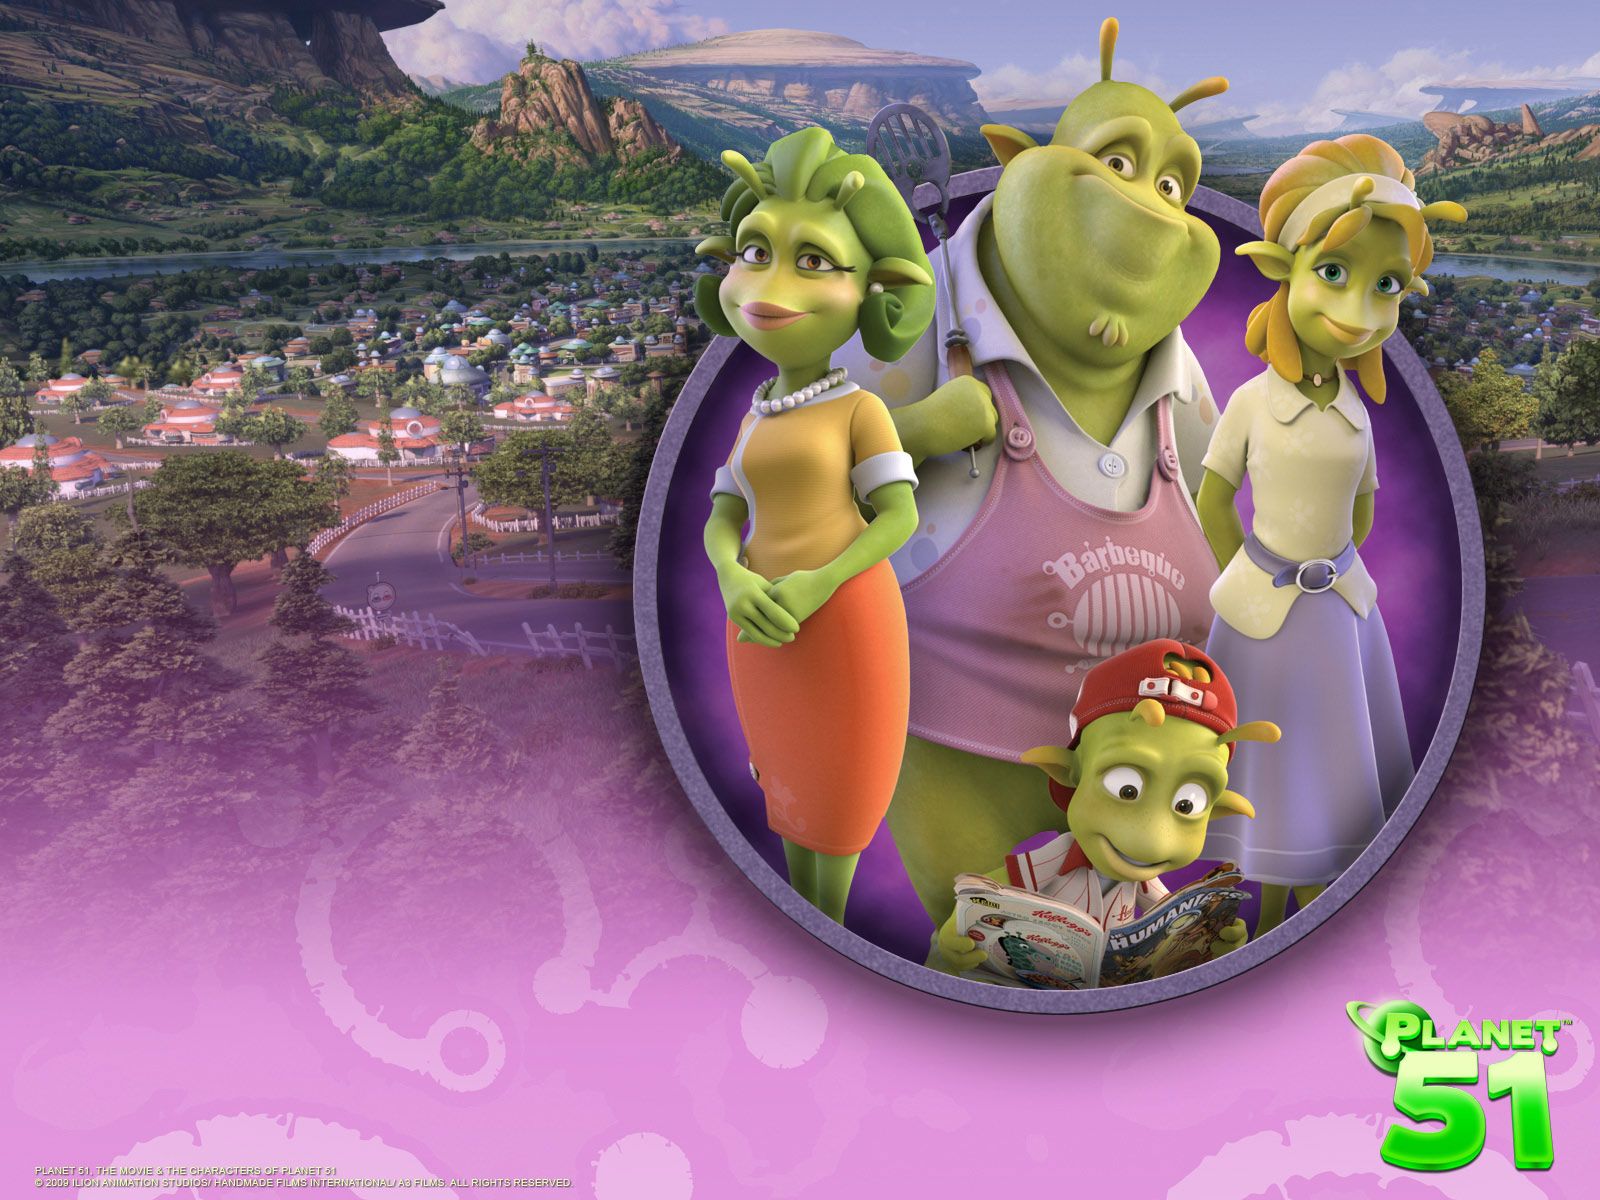 Planet 51. Animation movie, Animation, Planets wallpaper